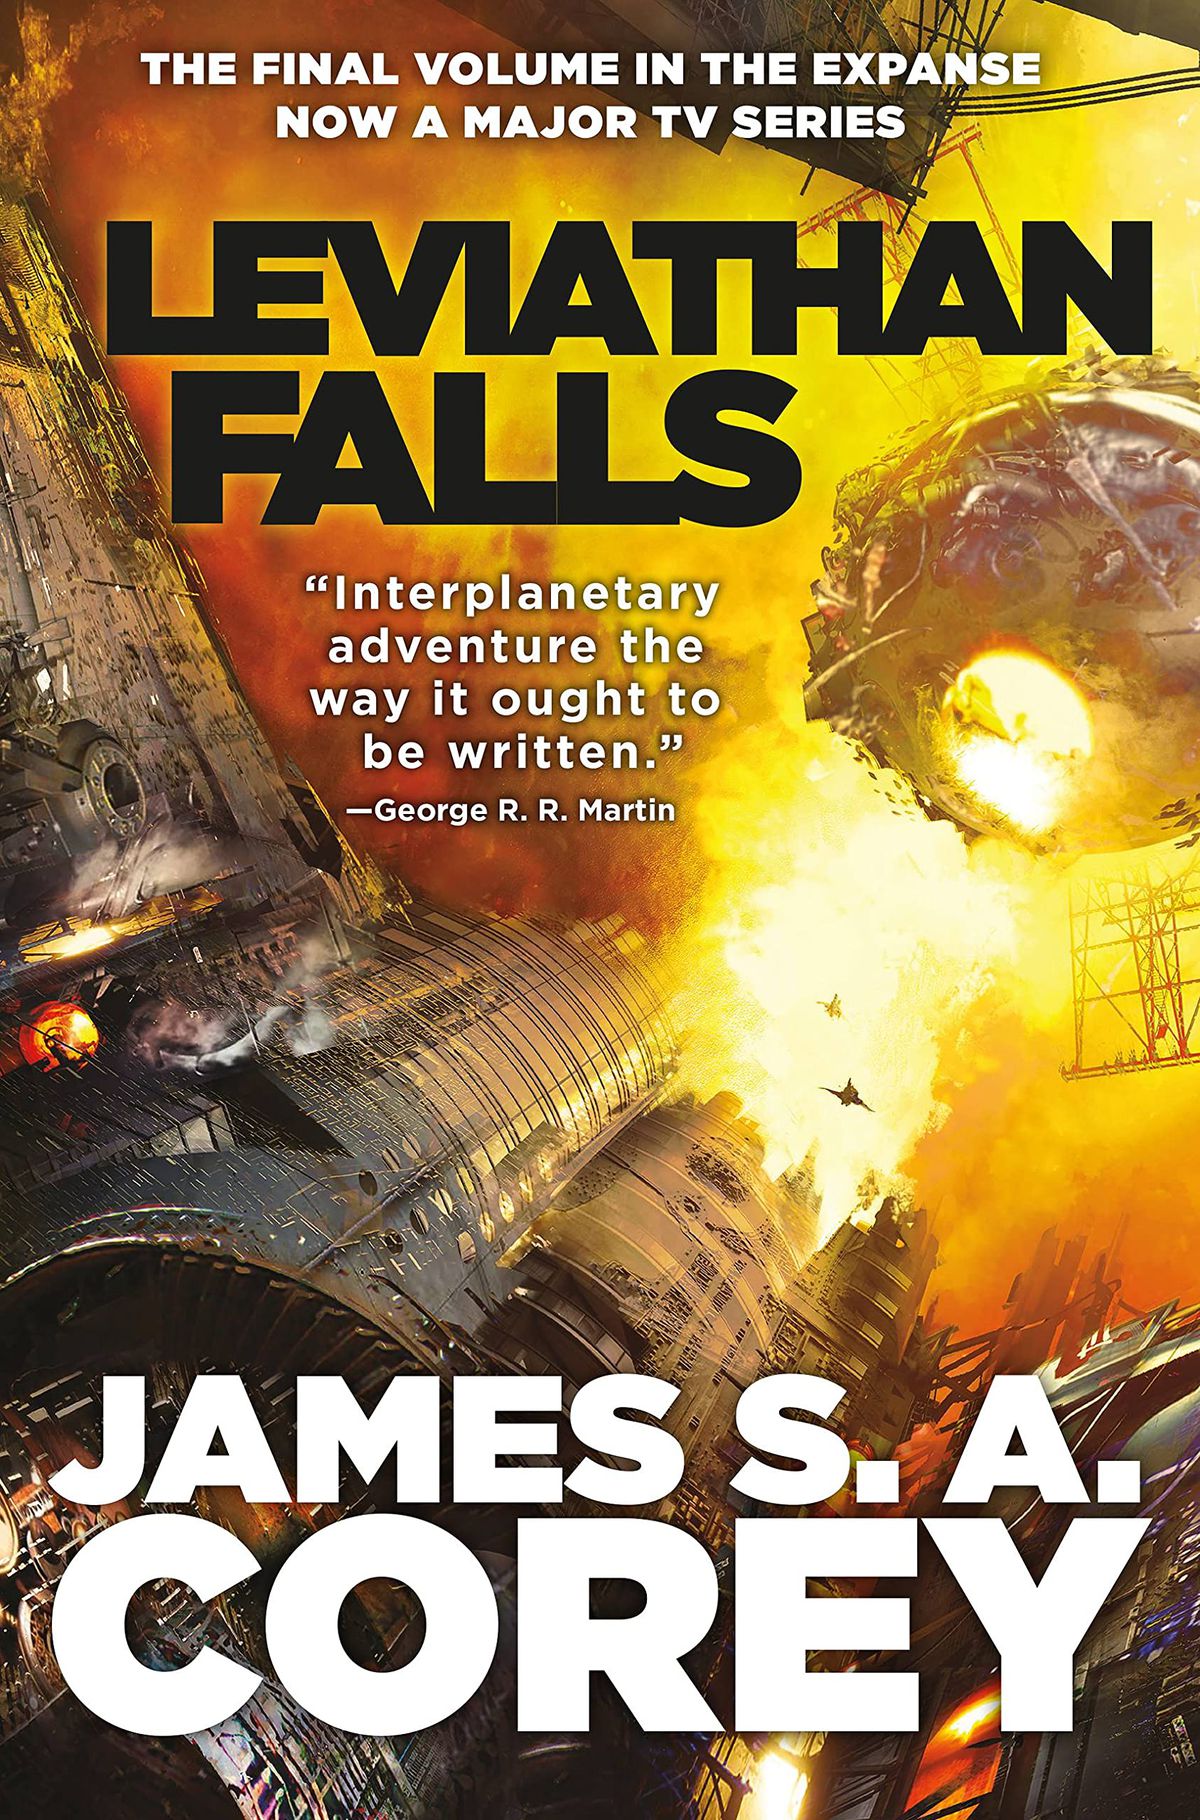 The cover for “Leviathan Falls” by James S.A. Corey showing a space station explosion